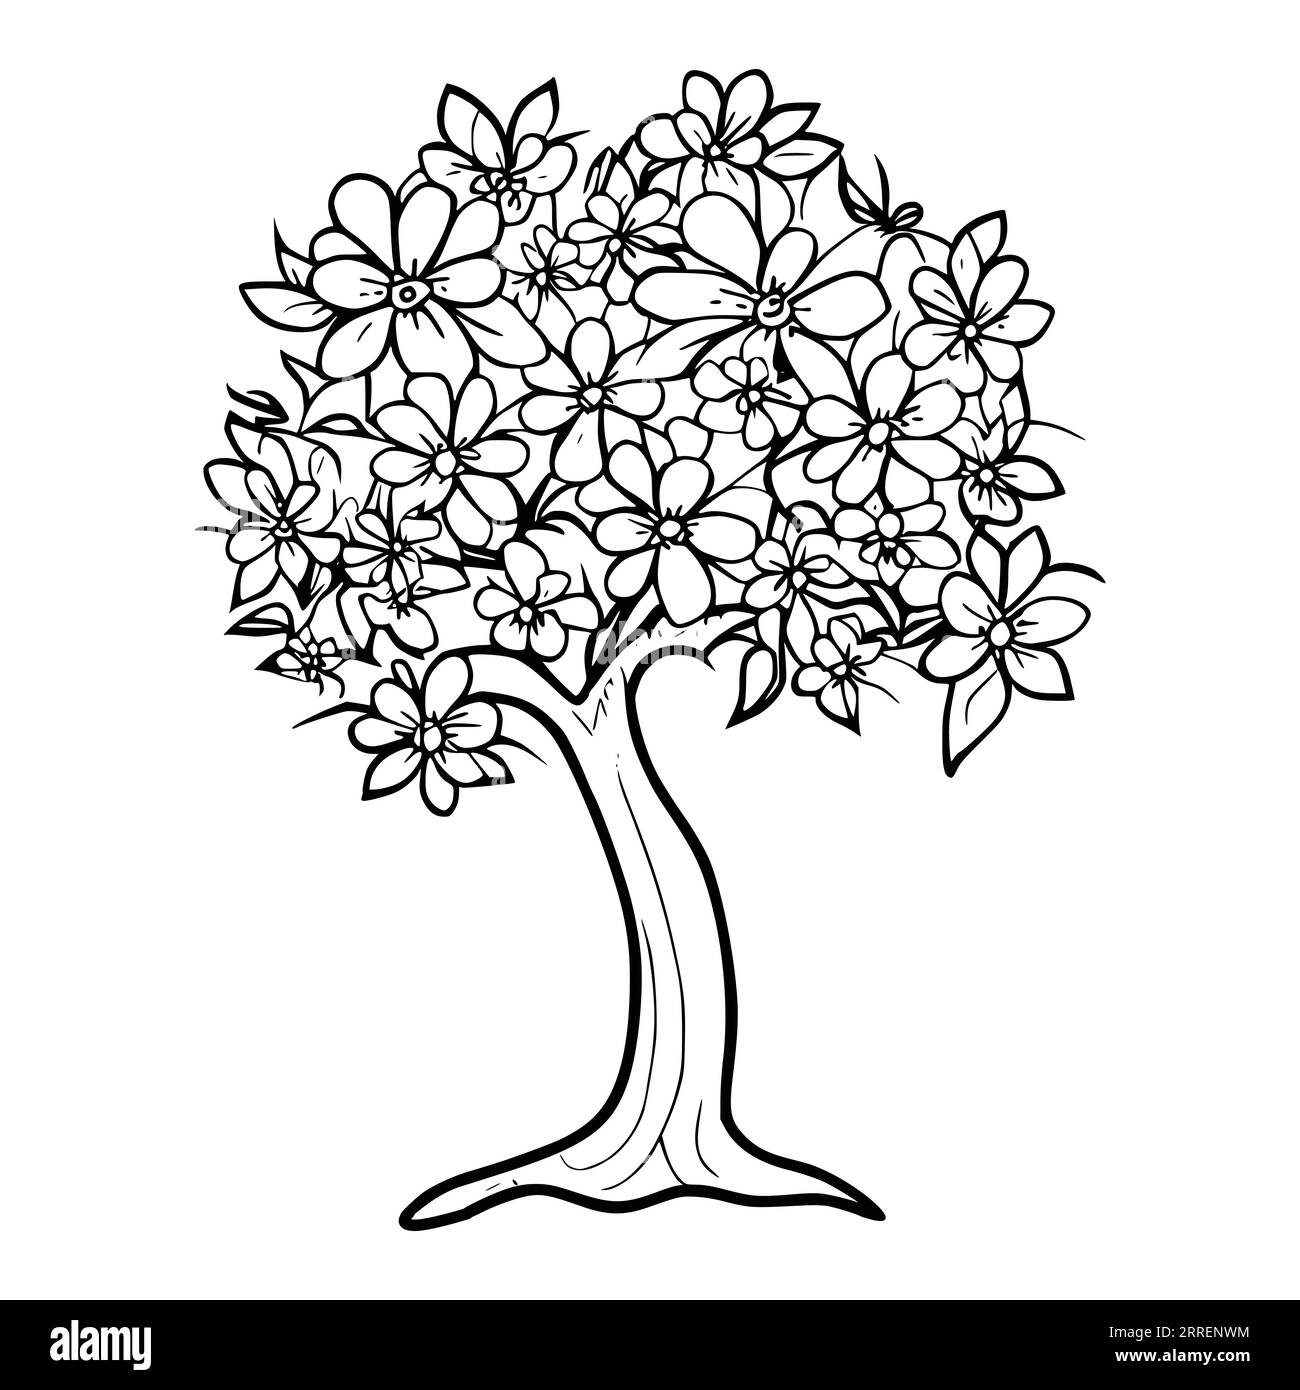 Flowers Tree Coloring Pages for Kids and Toddlers Stock Vector